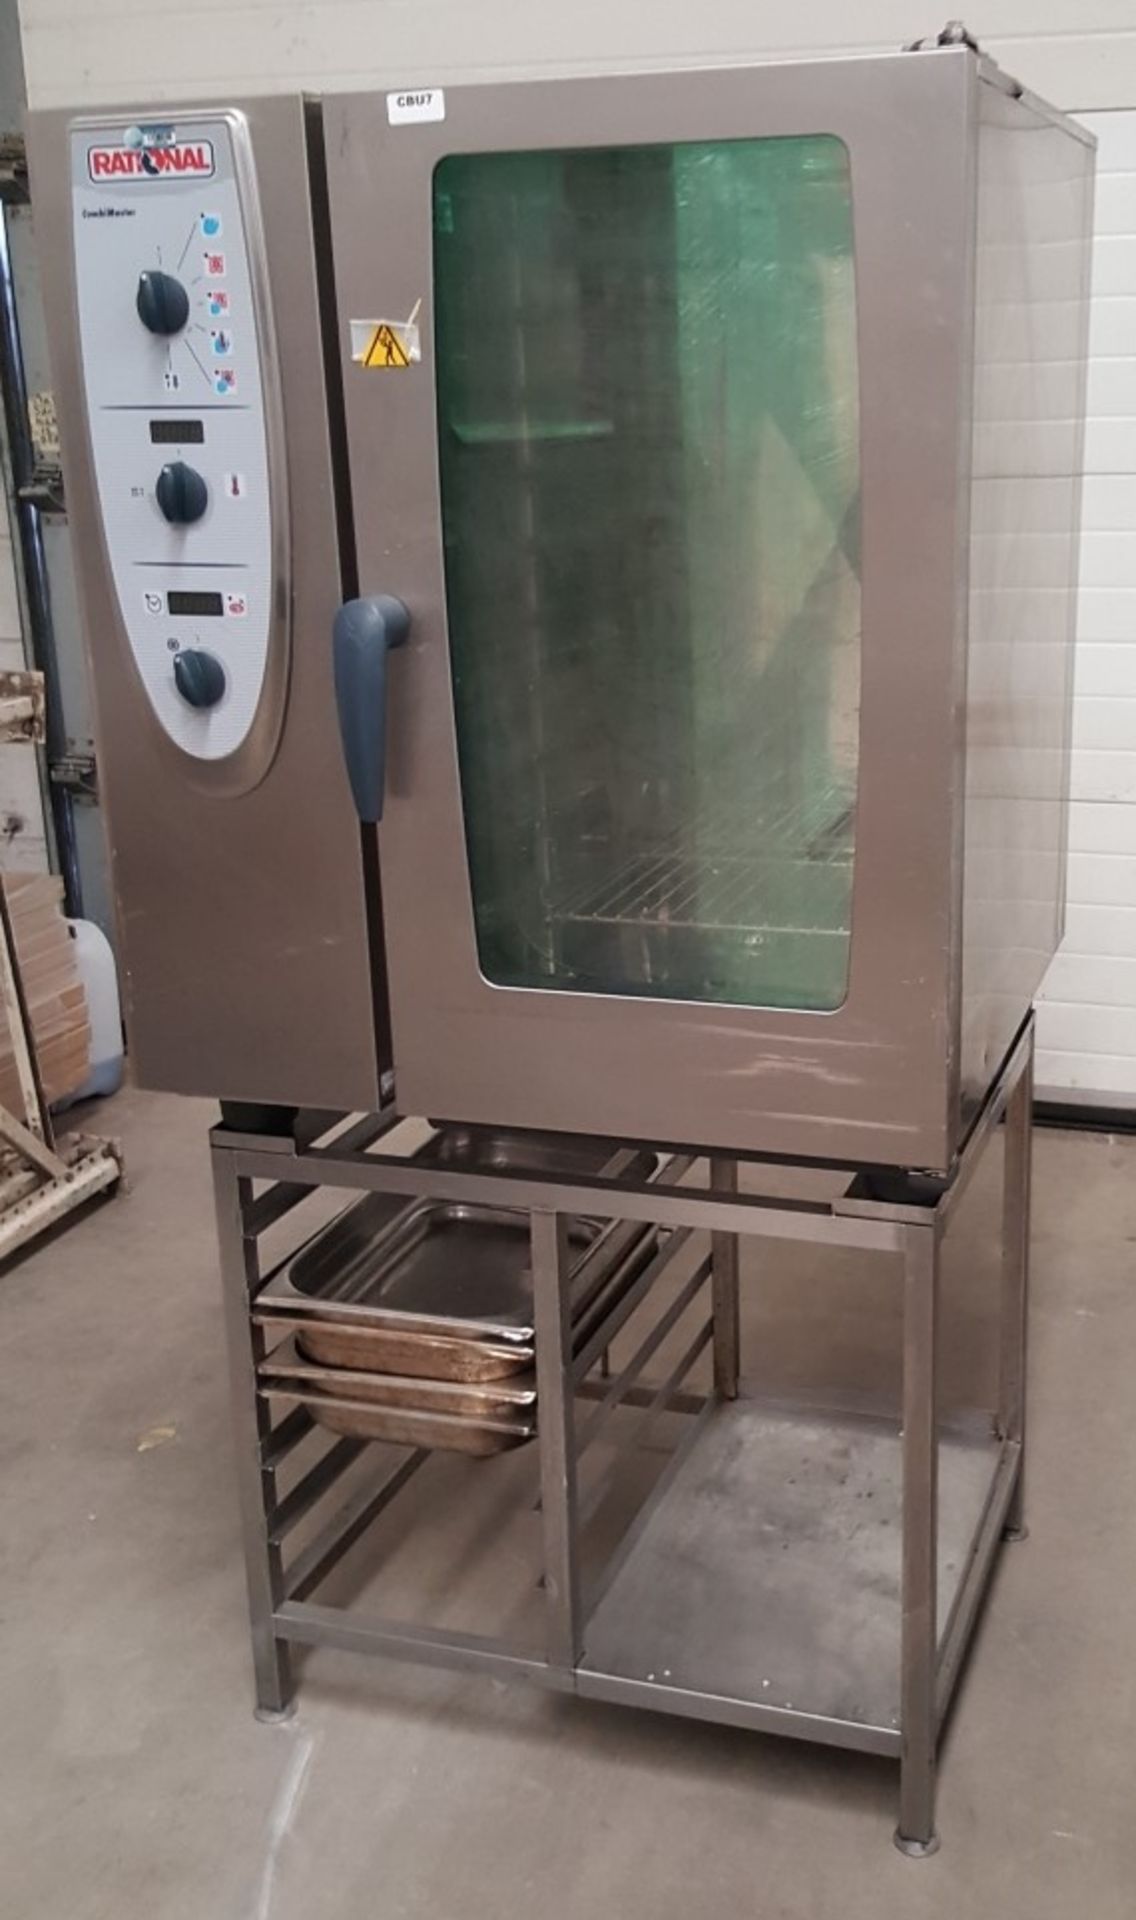 1 x RATIONAL CM101 COMBIMASTER 10 TRAY ELECTRIC COMBI OVEN - CL455 - Ref CBU7 - Image 2 of 12